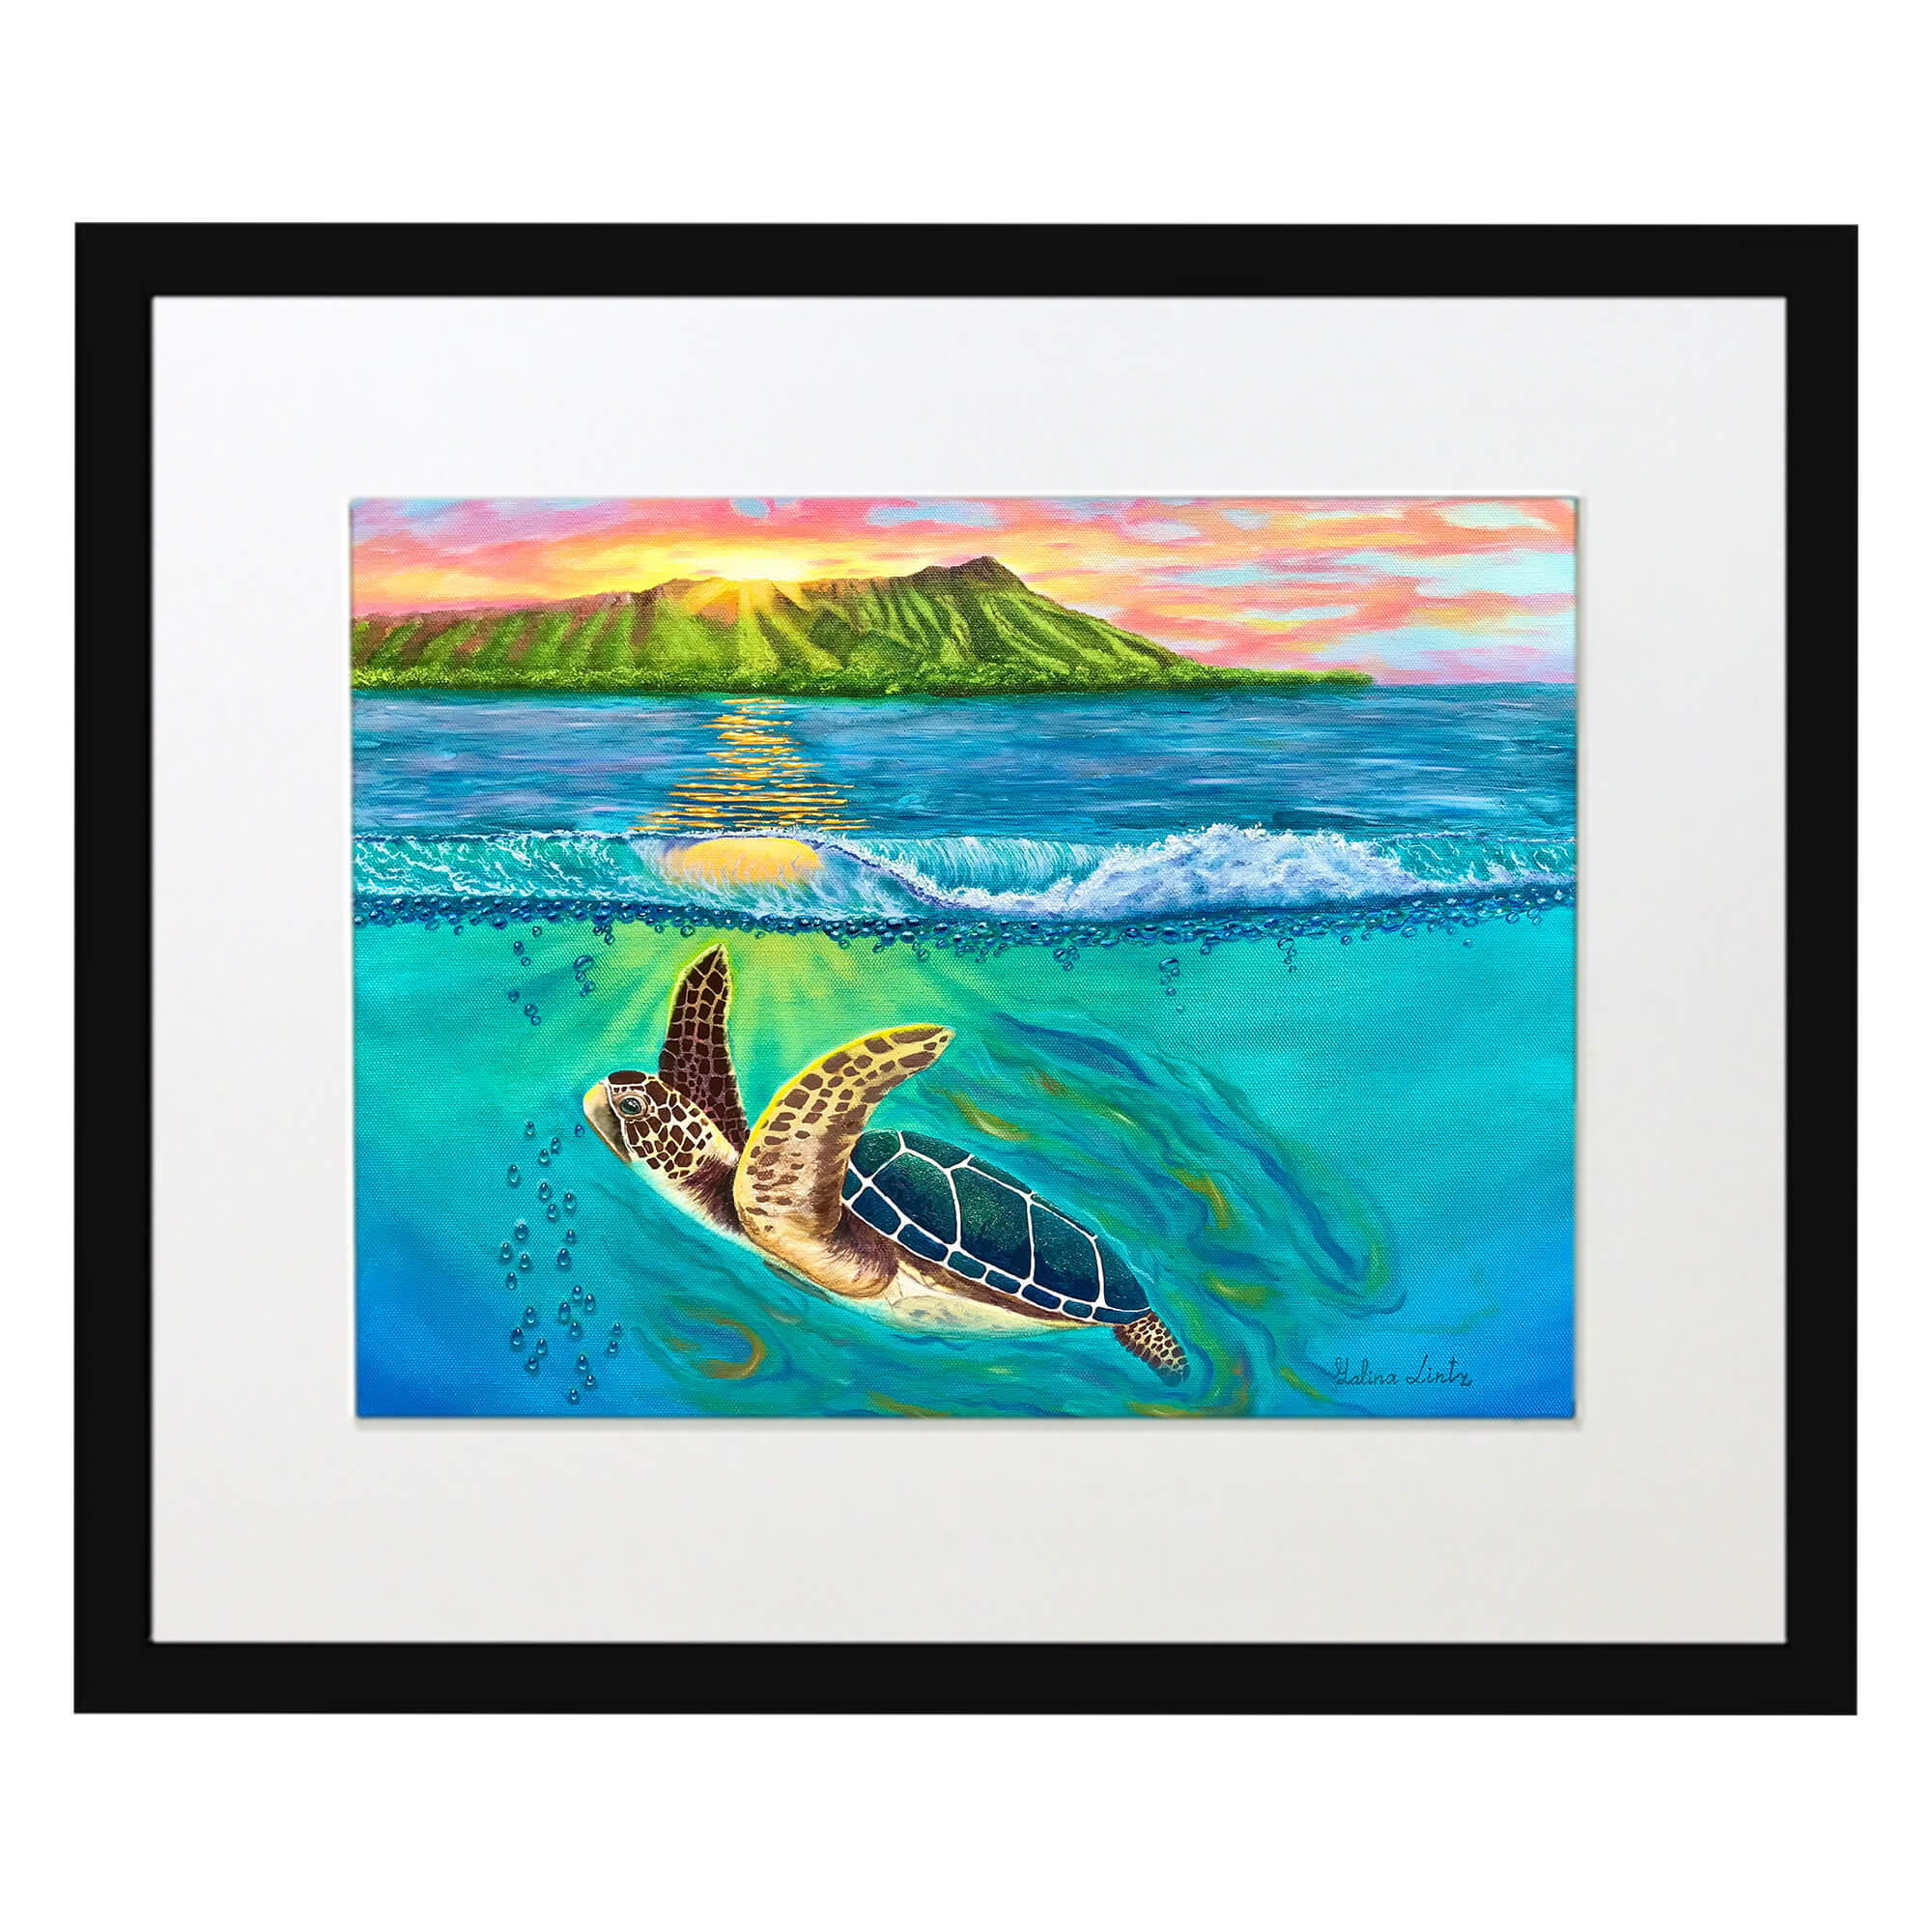 Matted art print with black frame featuring  the blue sea by hawaii artist Galina Lintz